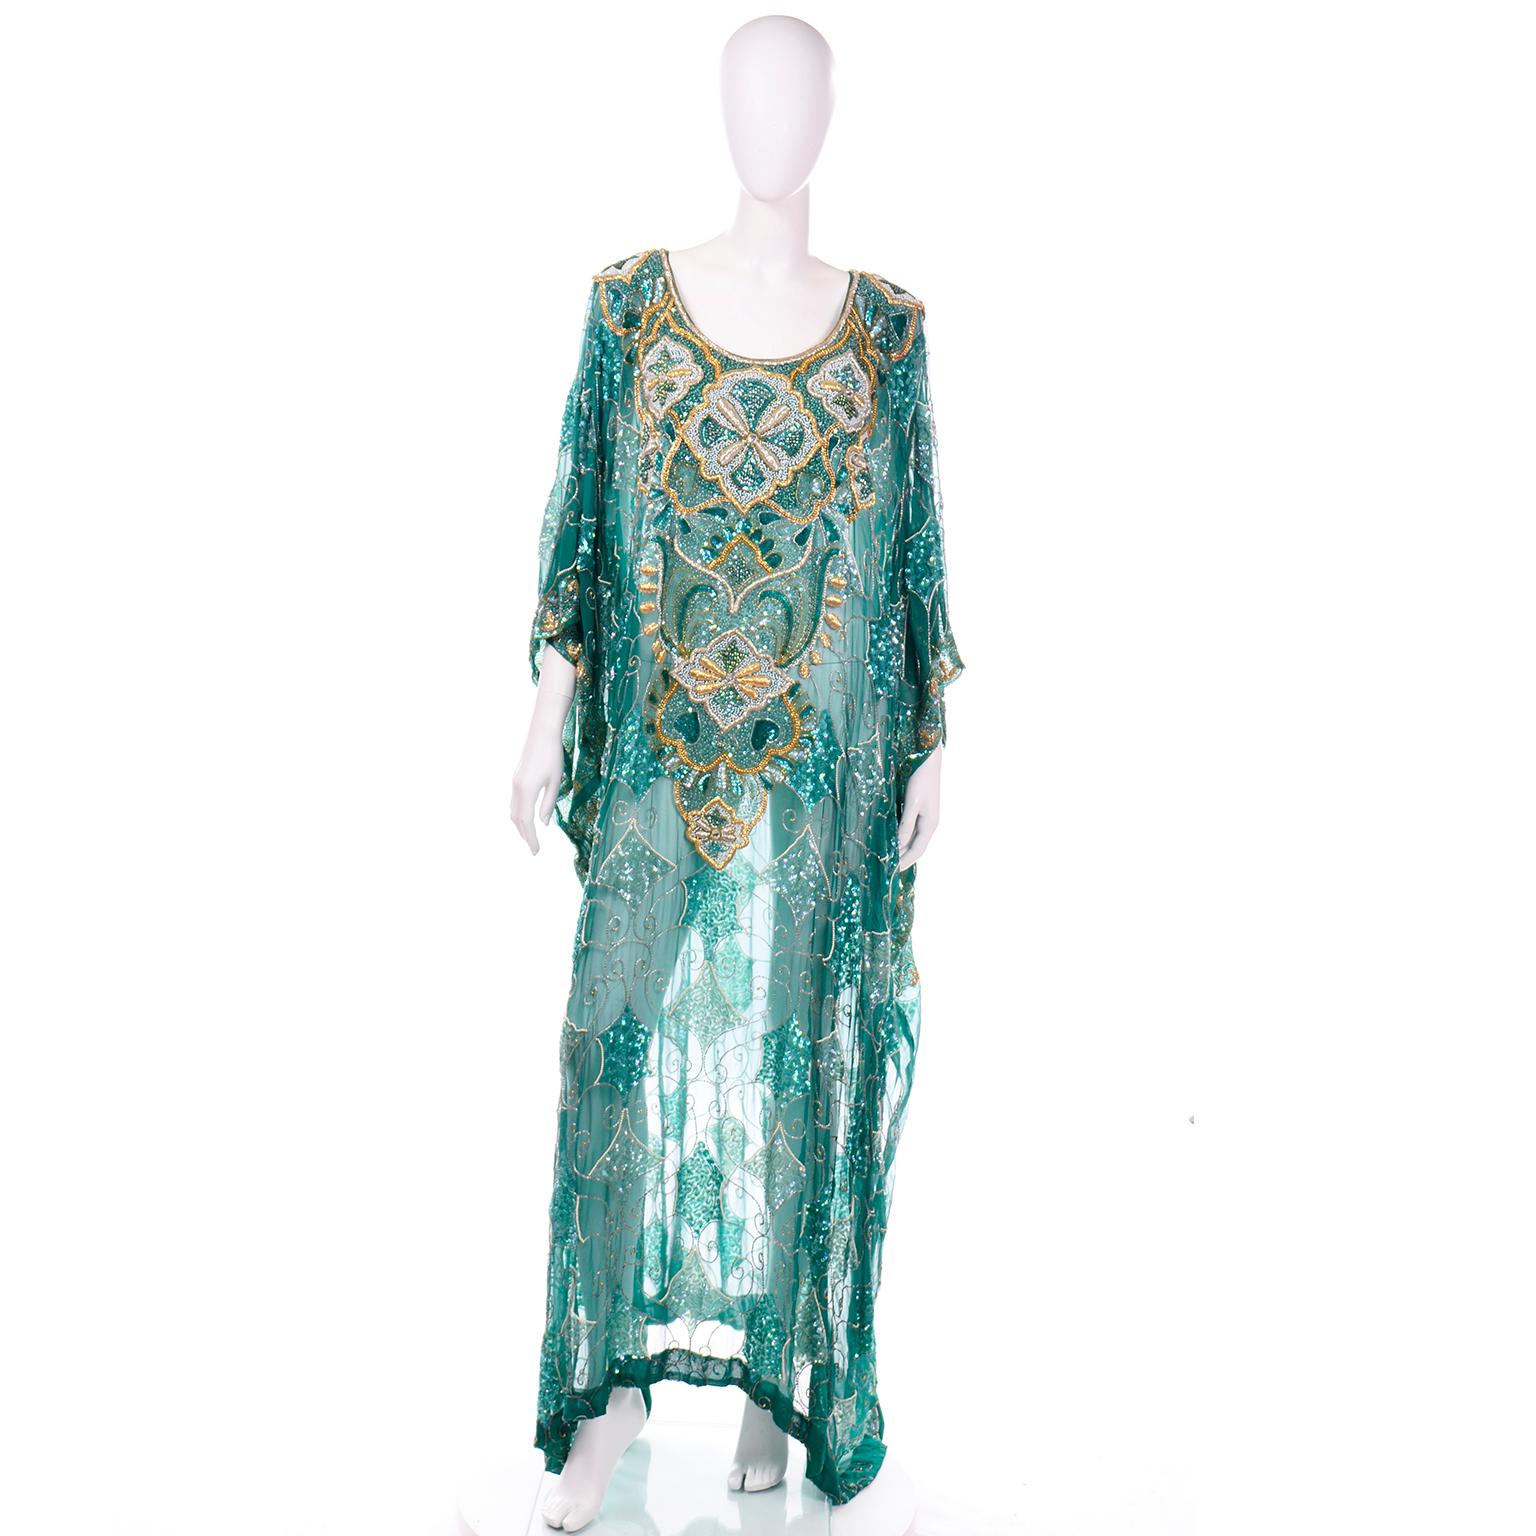 This is a truly stunning brilliant green fully beaded and sequin caftan style floor length evening dress. Dresses like these are so exquisite and this one came from a prominent estate we purchased that included fabulous vintage beaded evening gowns